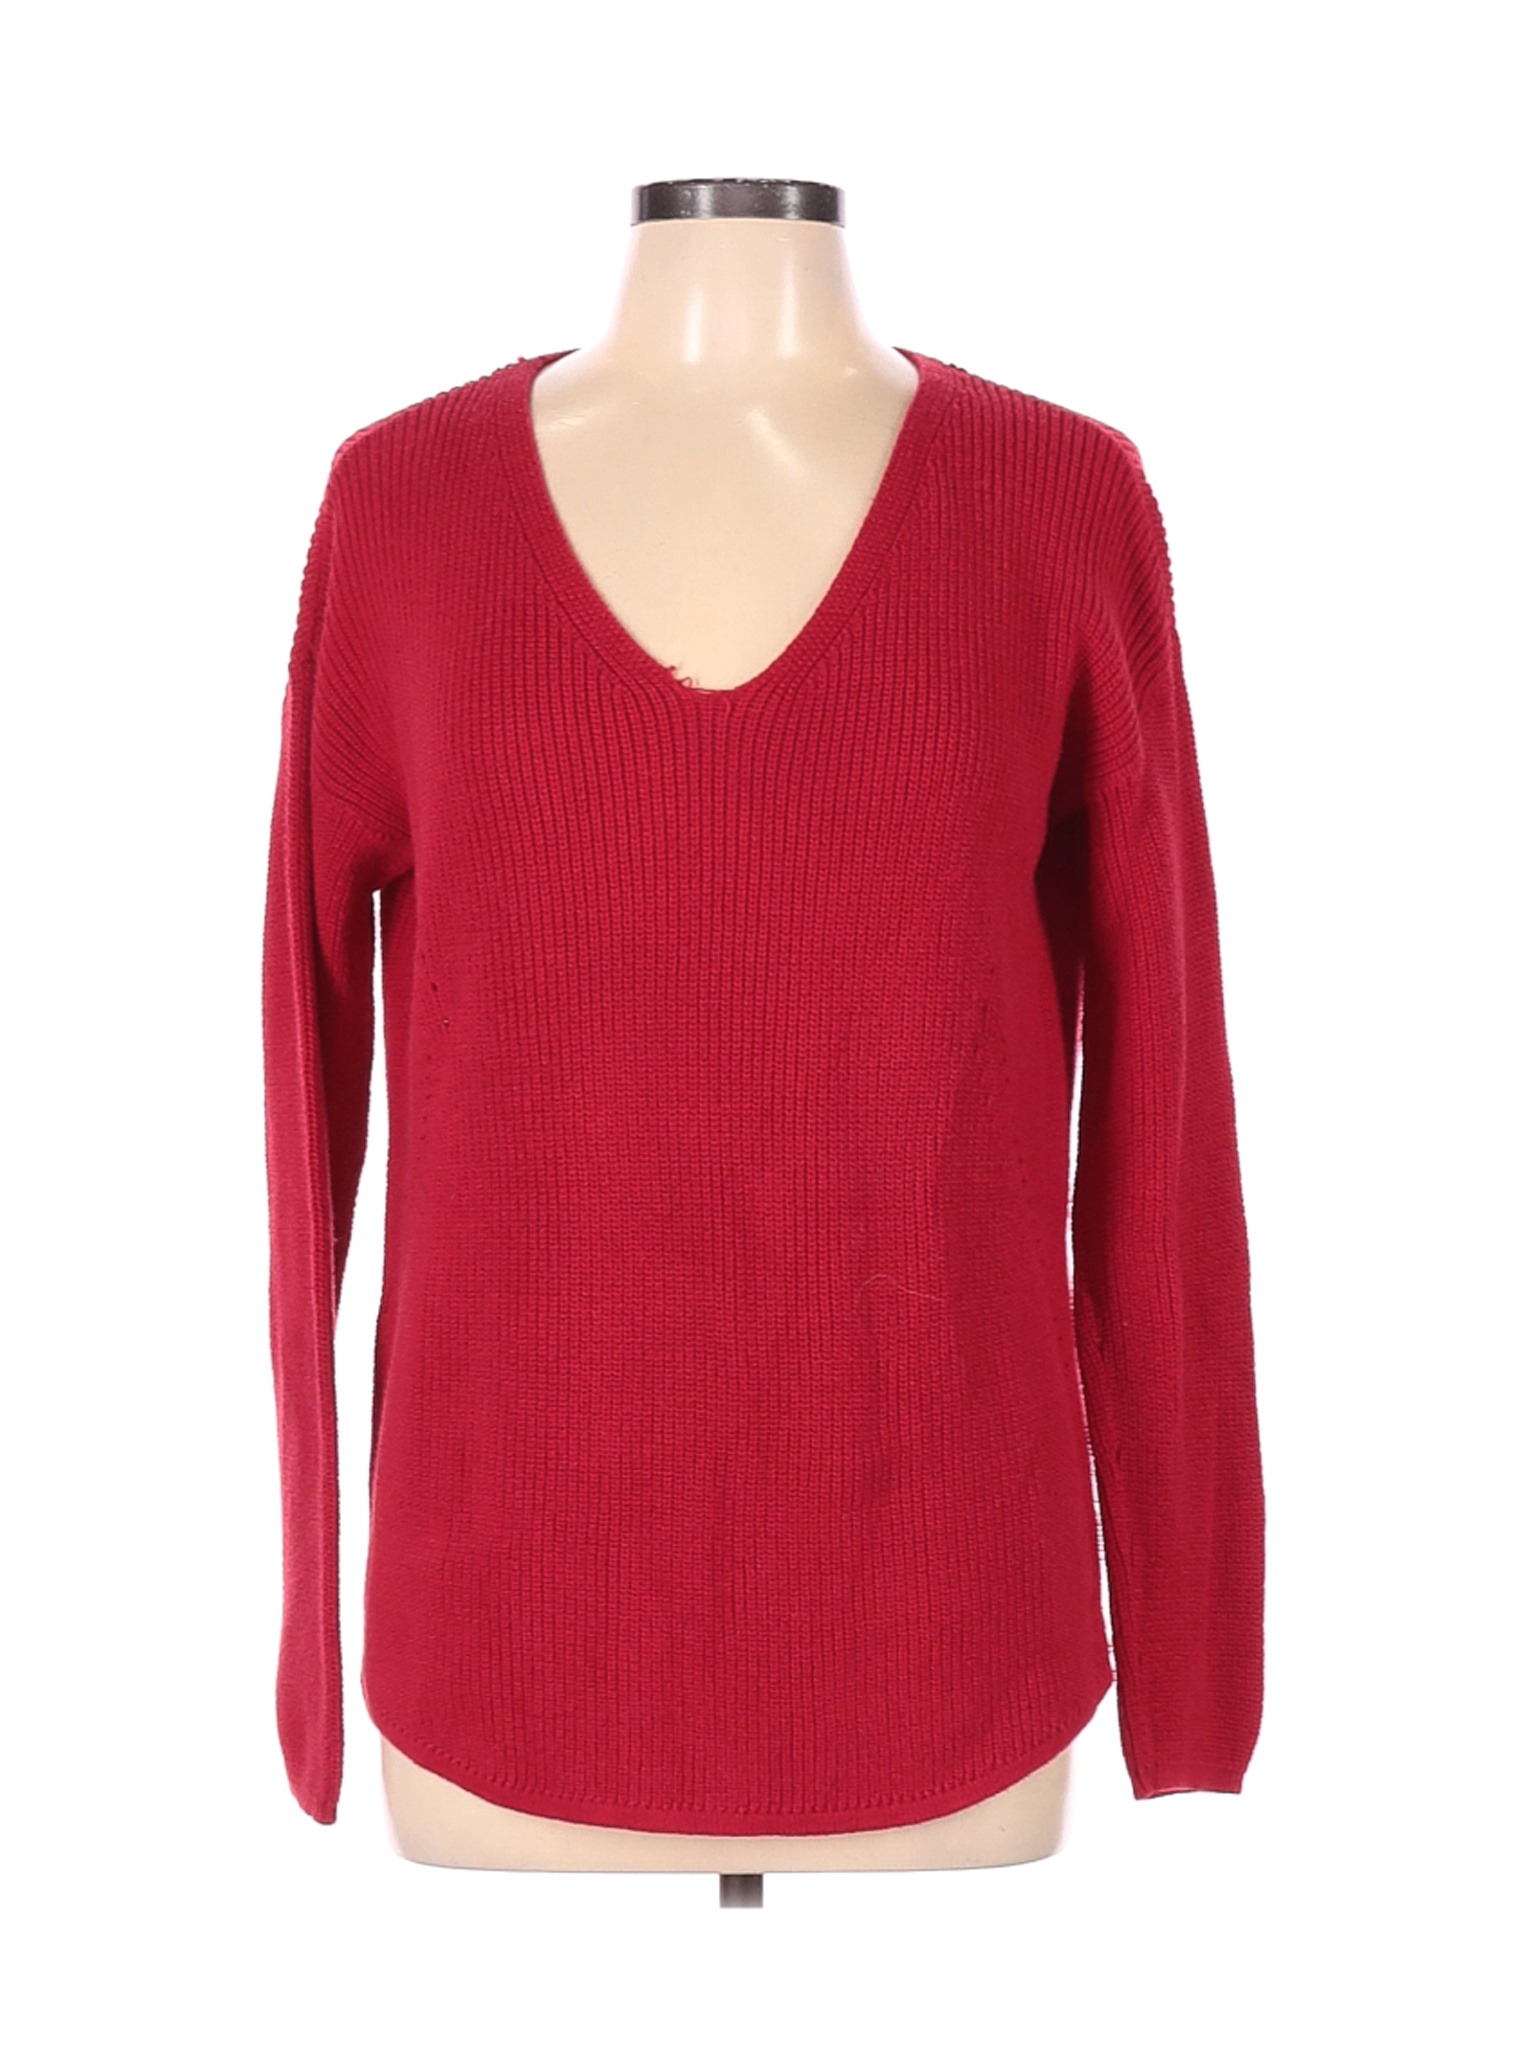 A.n.a. A New Approach Women Red Pullover Sweater L | eBay